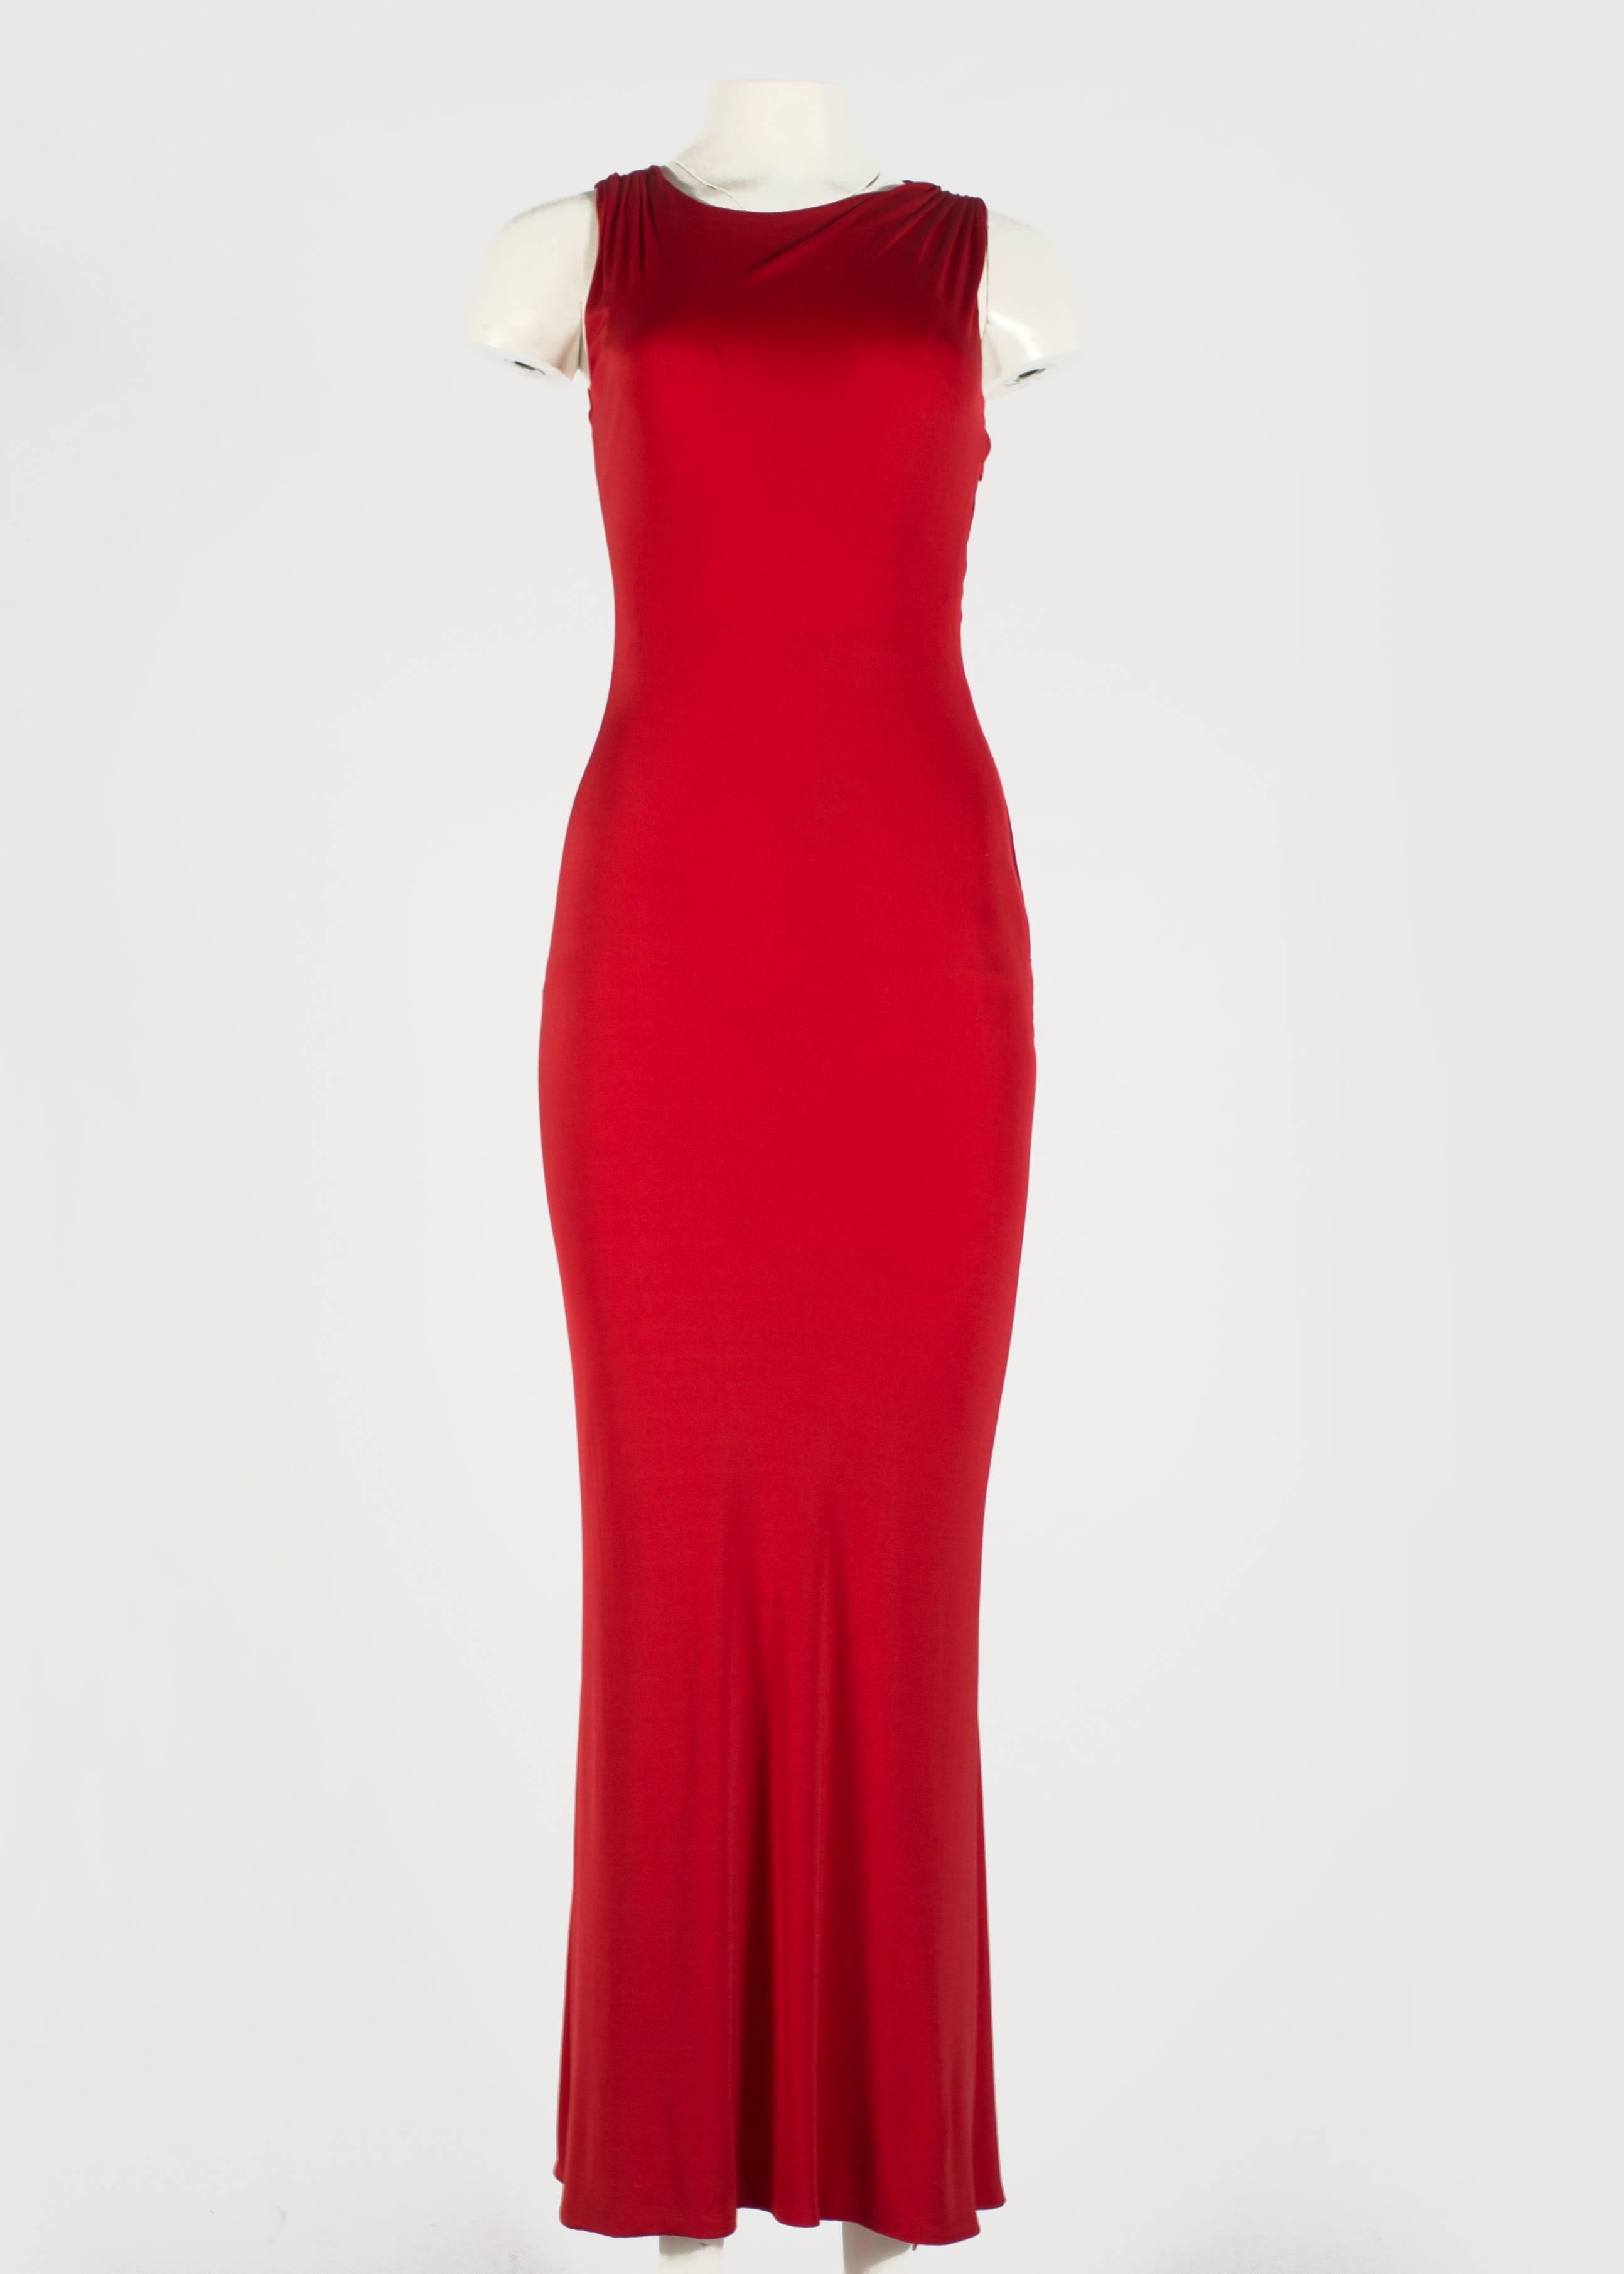 Red Gianni Versace red silk jersey pleated full length evening dress, 1990s For Sale